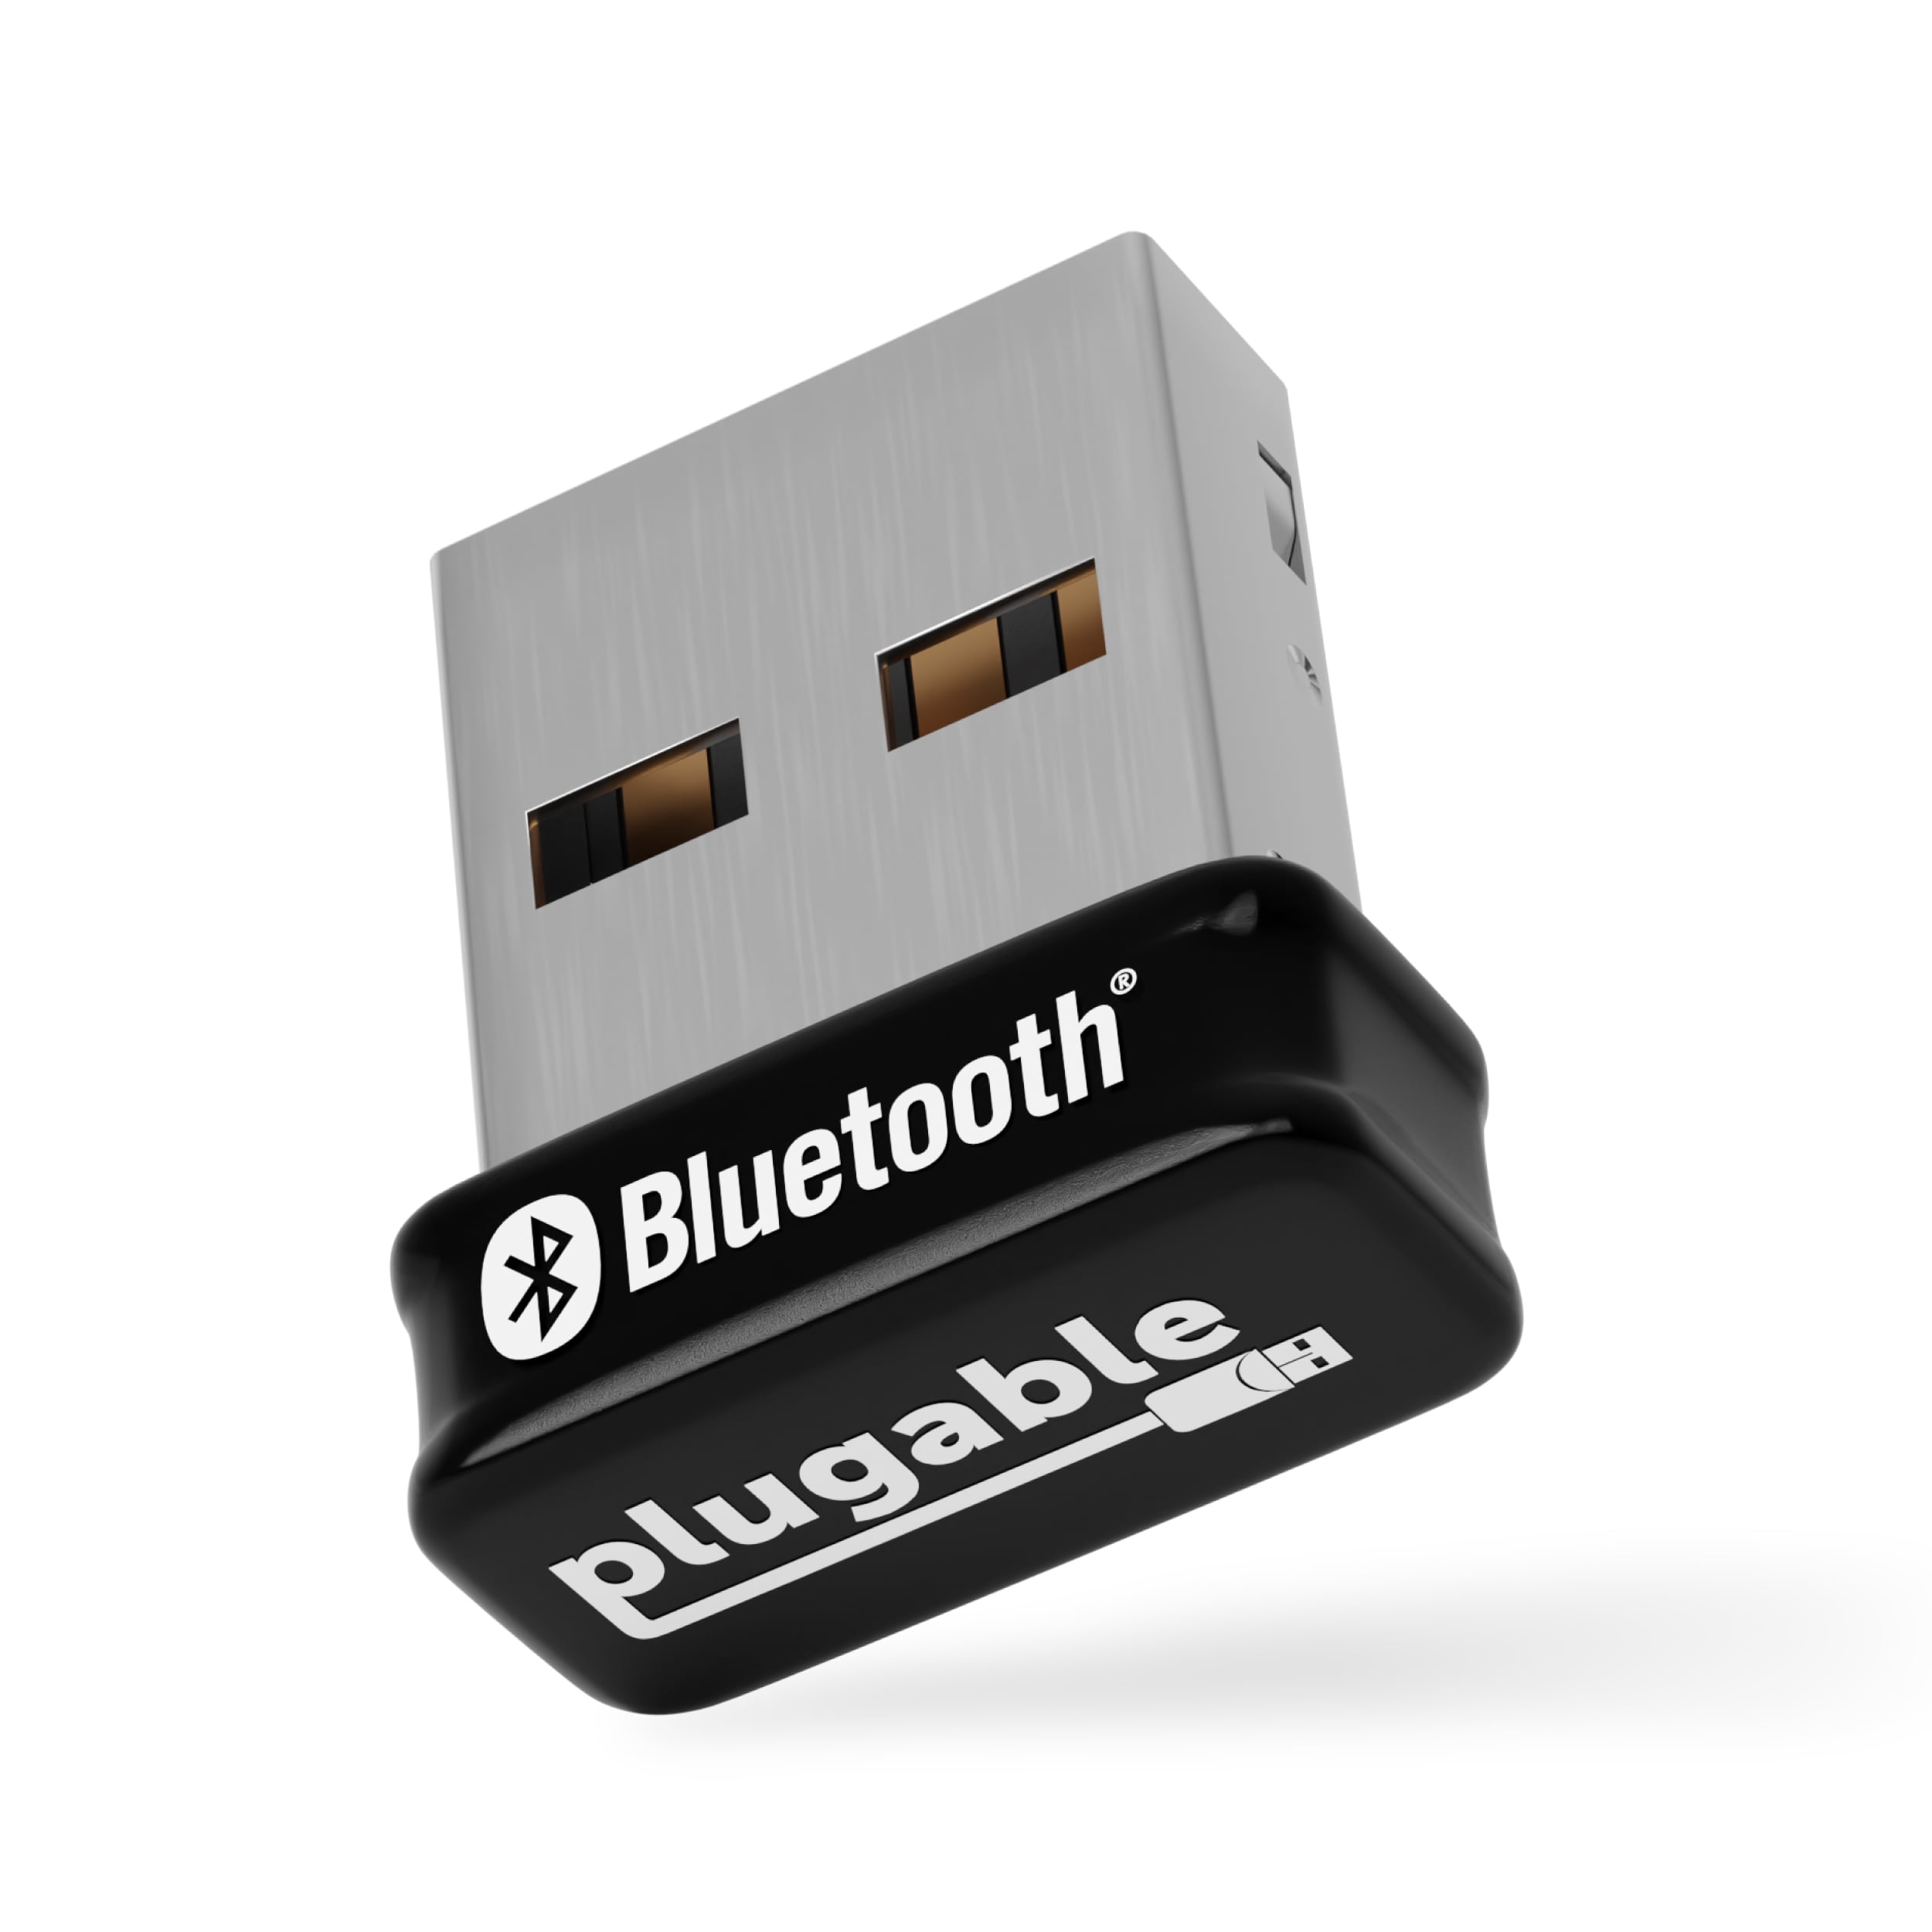 USB Bluetooth 5.3 Adapter for Desktop PC, Really Plug & Play Mini Bluetooth  EDR Dongle Receiver & transmitter for Laptop Computer Headphones Keyboard  Mouse Speakers Printer Windows 11/10/8.1